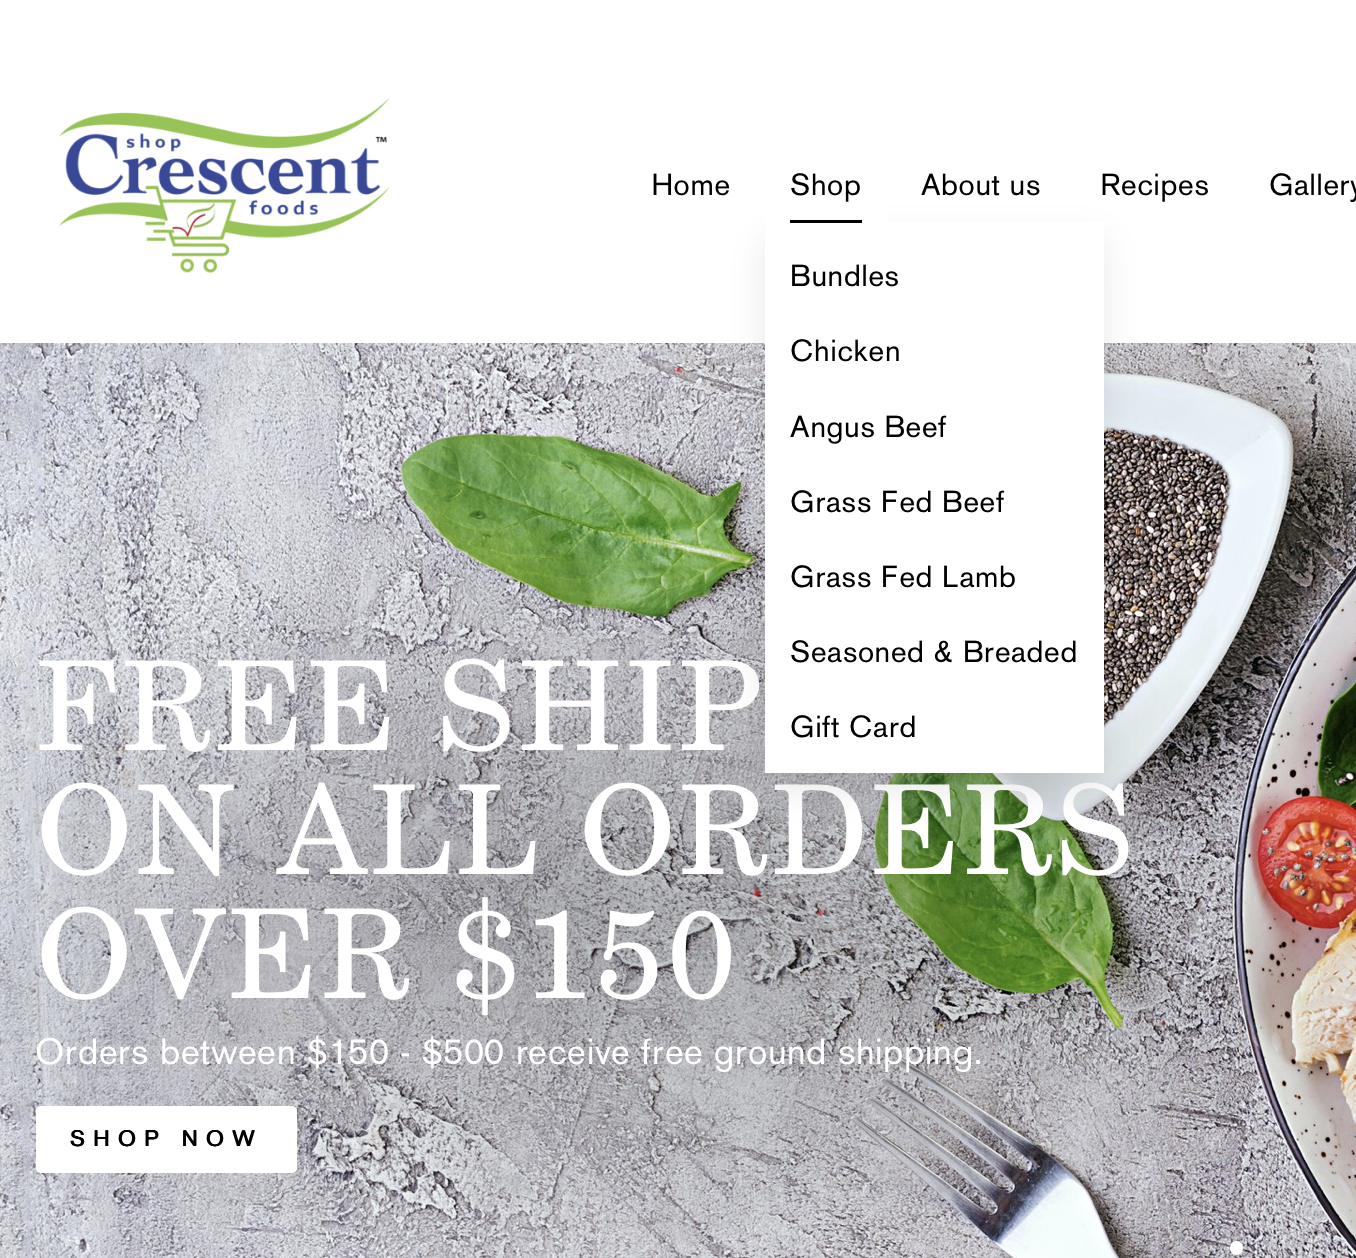 Shop Crescent Foods | Home Meat Delivery